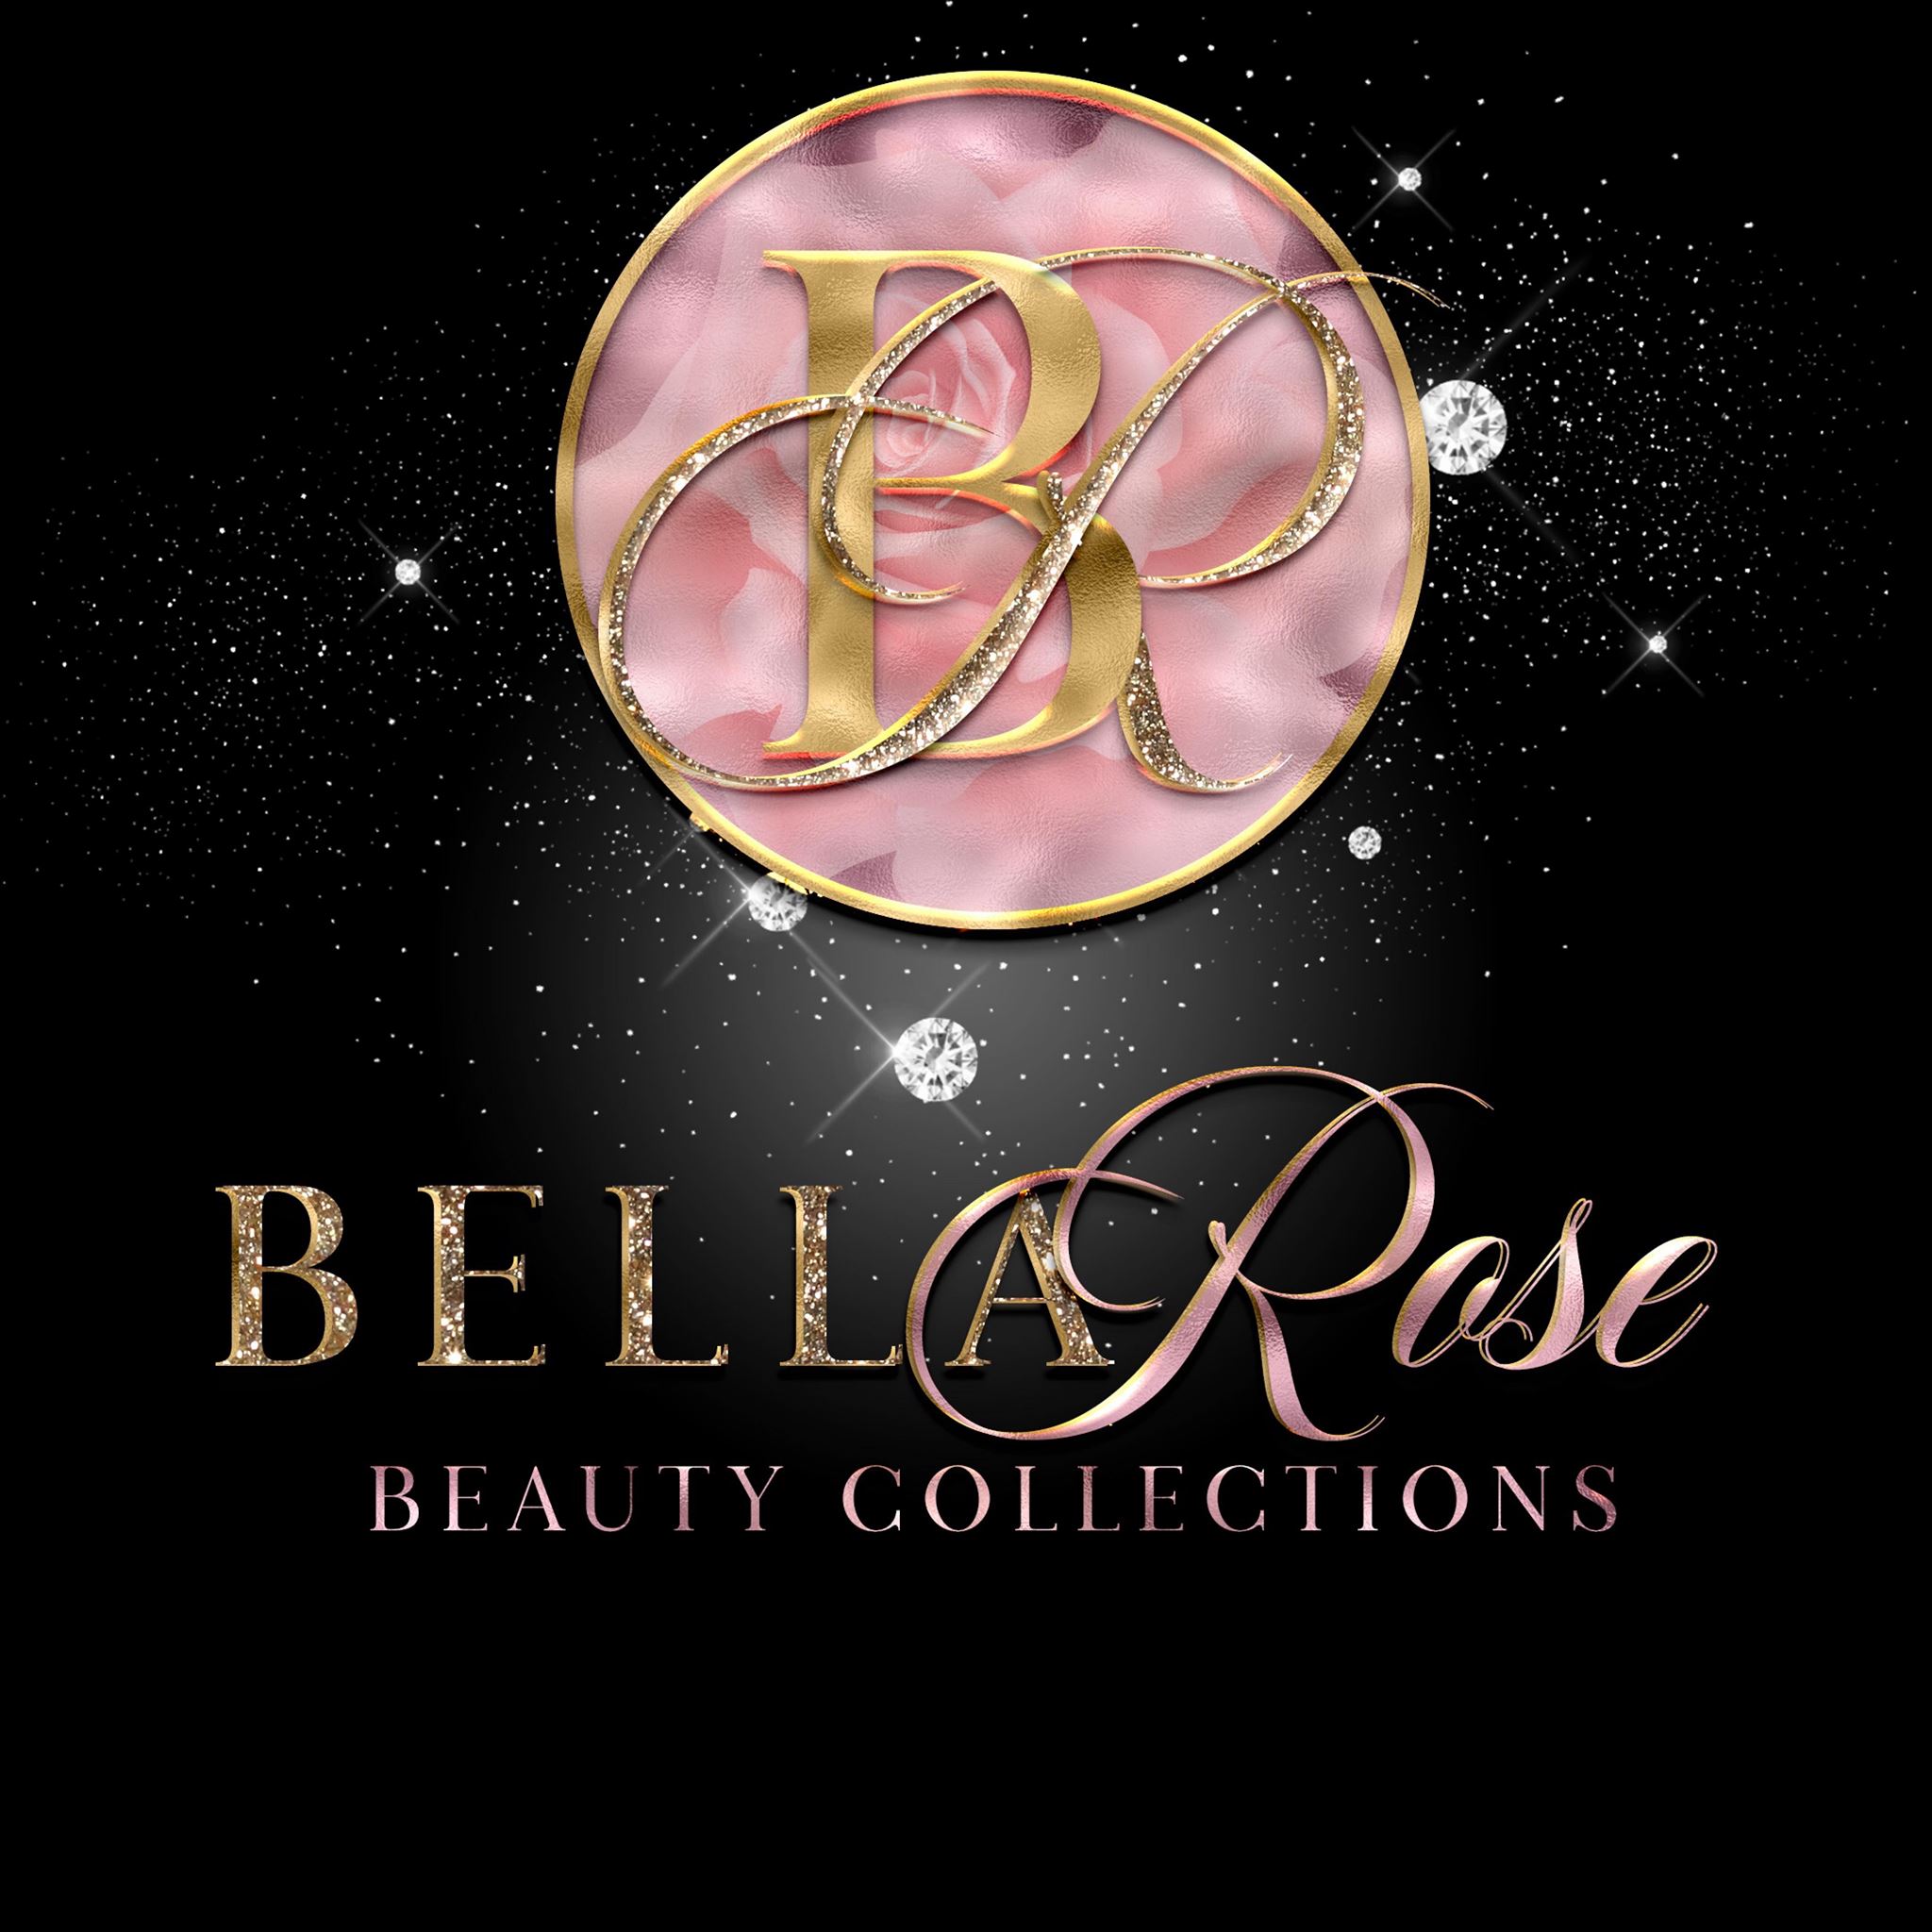 BellaRose Beauty Collections